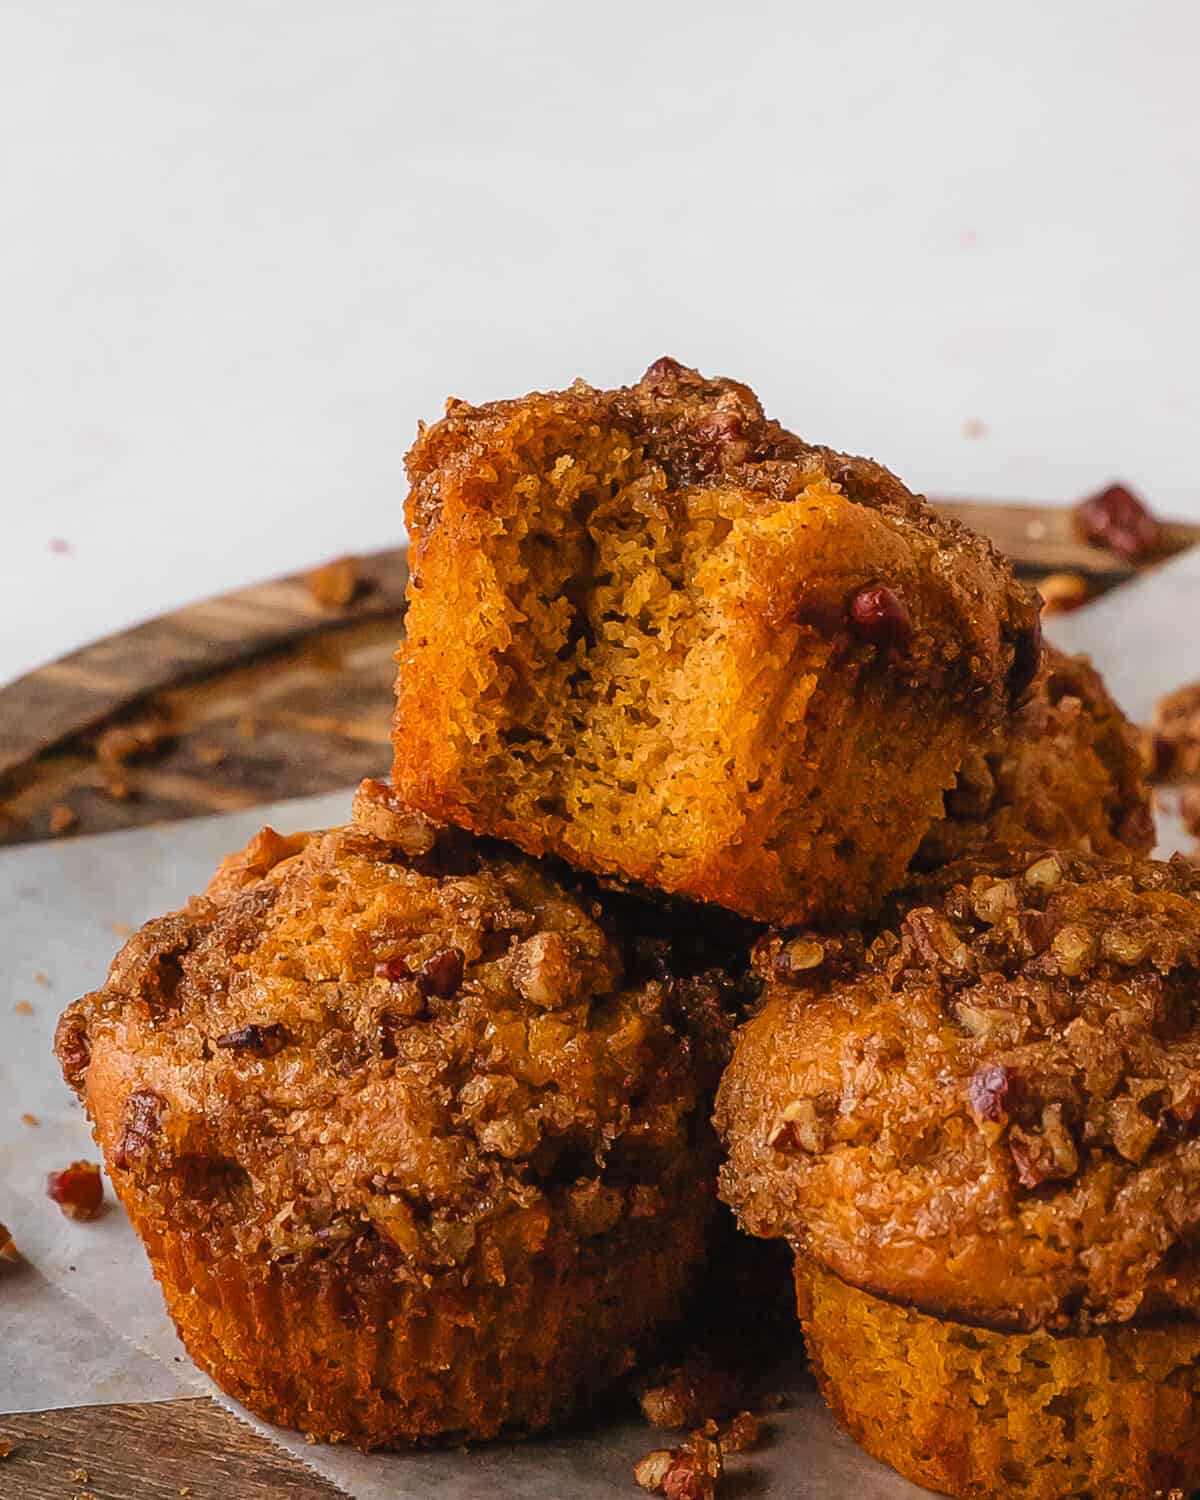  Sweet potato muffins are deliciously soft, moist and fluffy cinnamon spiced muffins with sweet potatoes.  They’re topped with a quick and easy brown sugar cinnamon streusel. Grab one or two for a wonderfully delicious breakfast, snack or dessert.